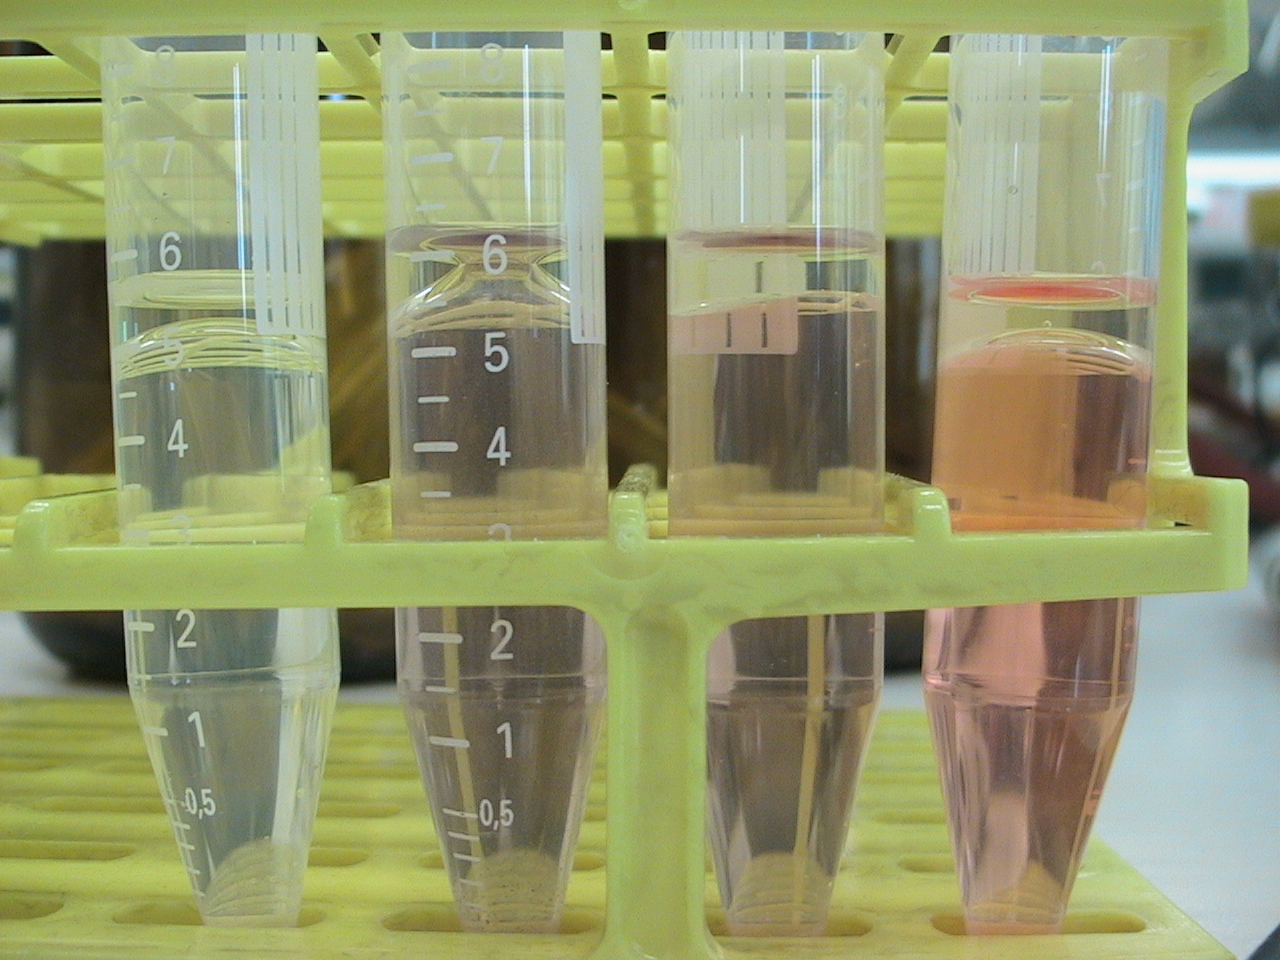 Left to right: Water and oil; Water, oil, Congo Red staining and AssembledChaplins; Water, oil, Congo Red staining and monomeric chaplins; Water, oil and Congo Red staining.